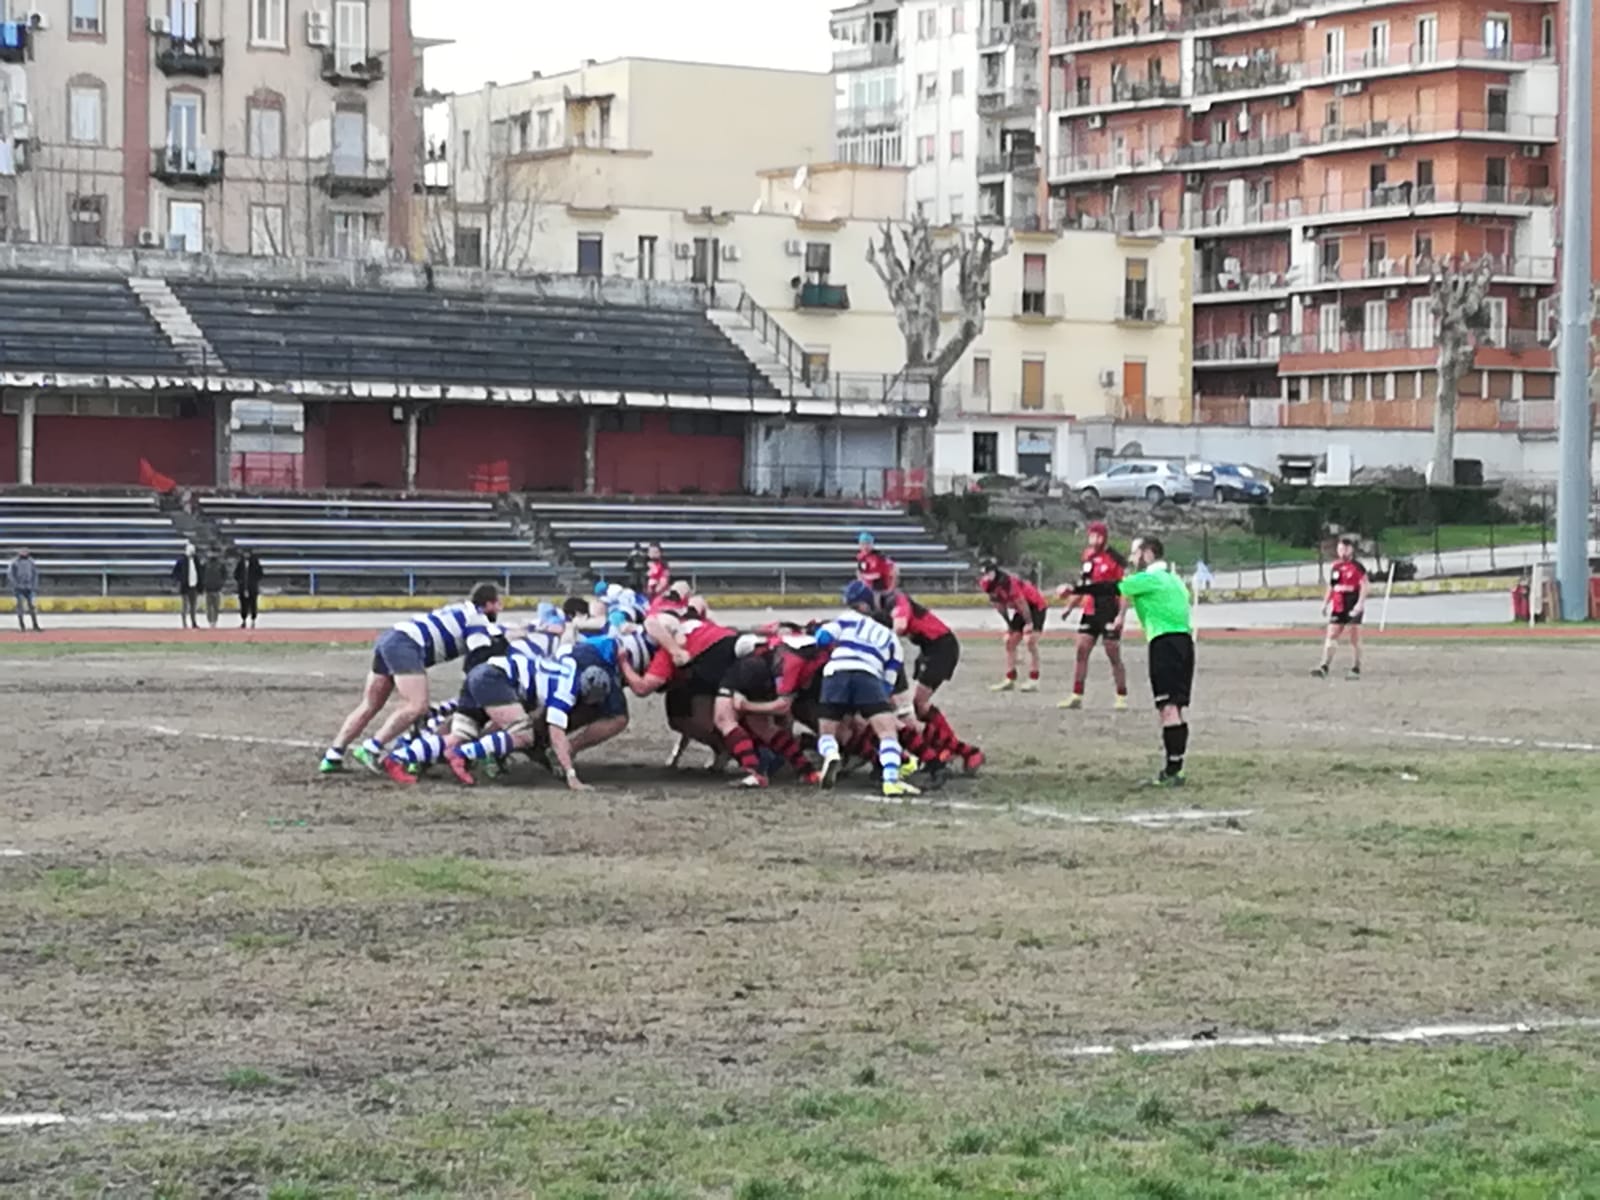 PAGANICA RUGBY